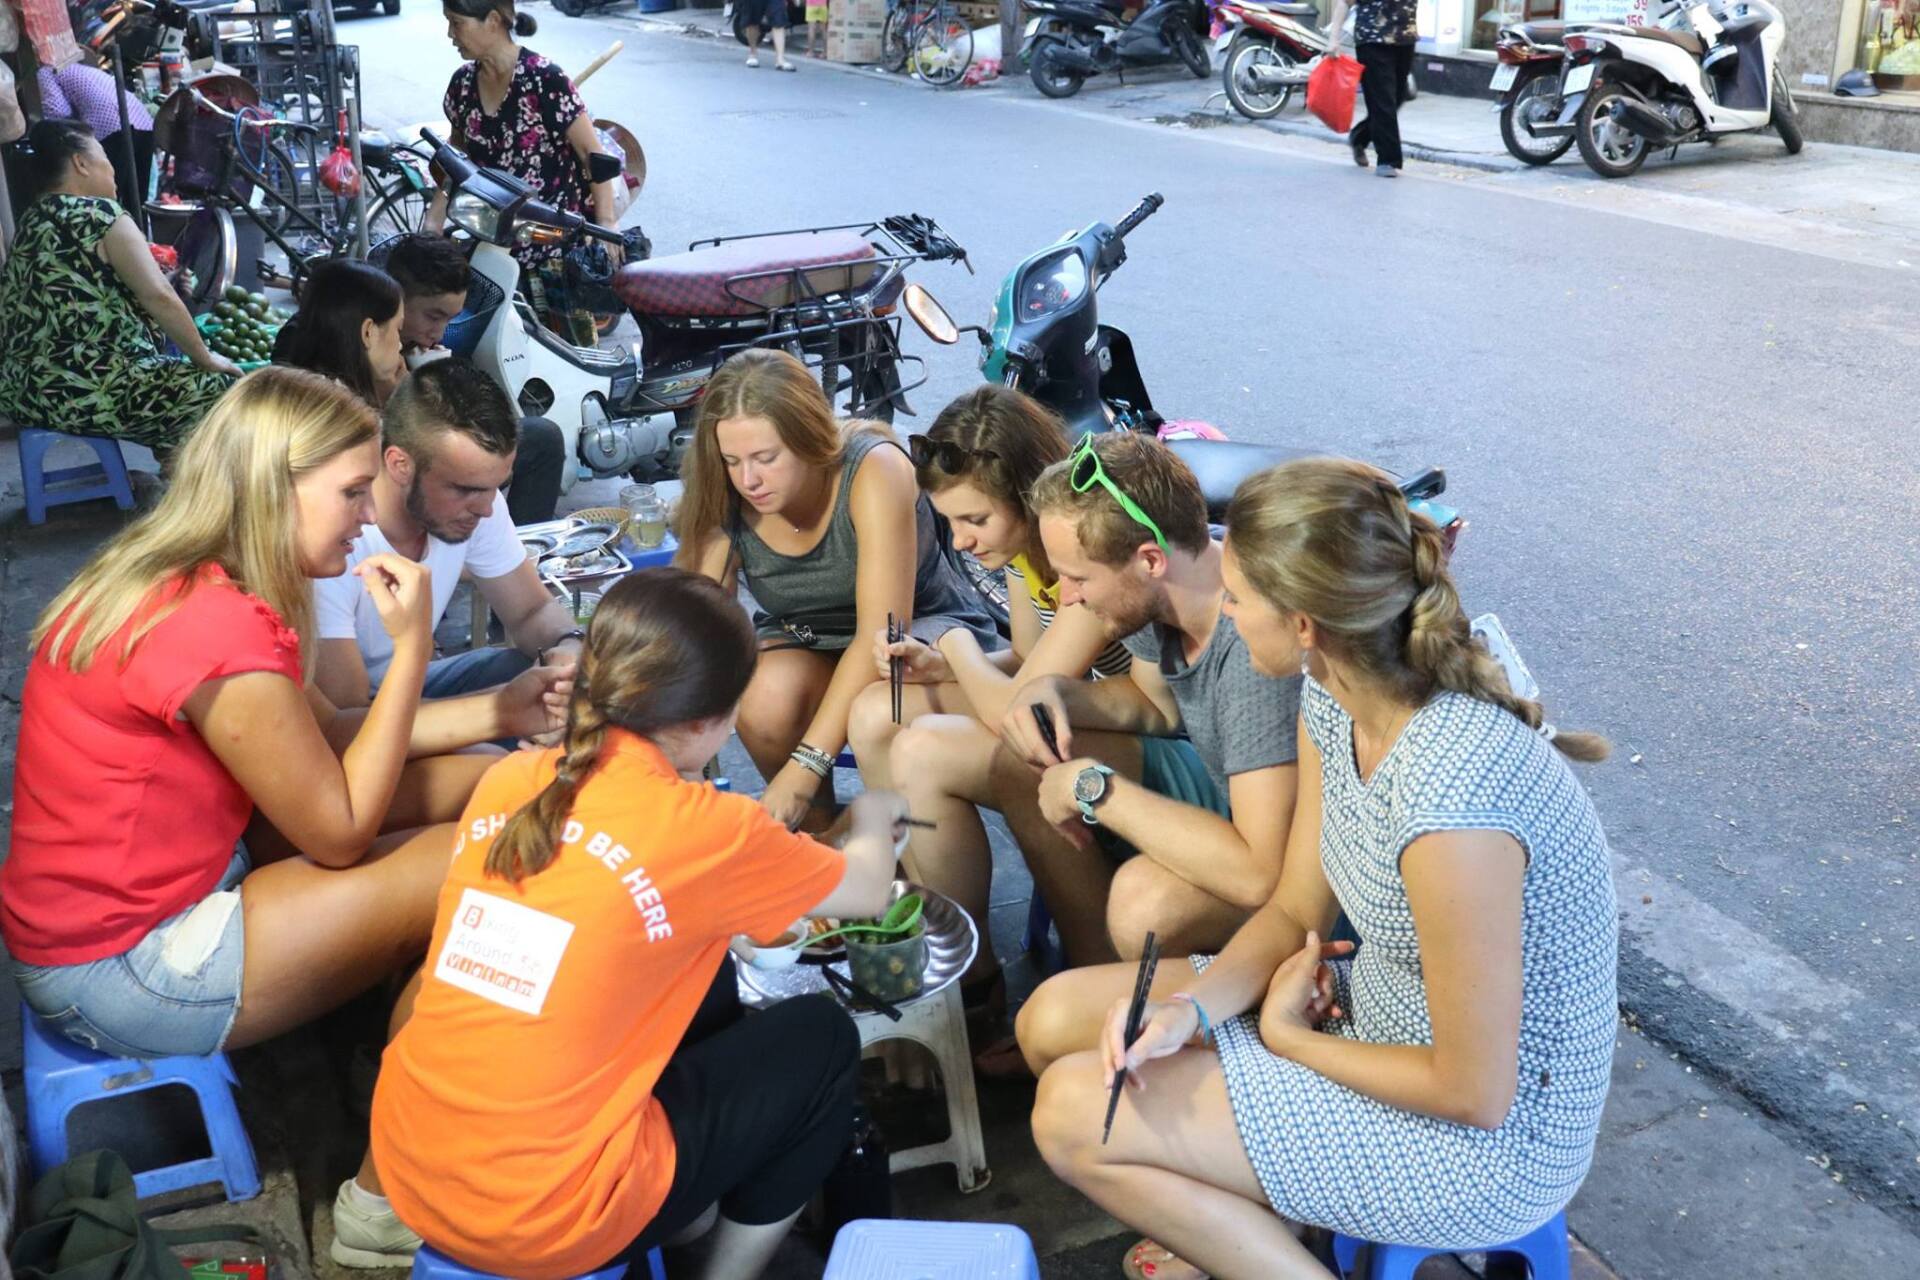 A group of people are sitting around a table on the side of the road.